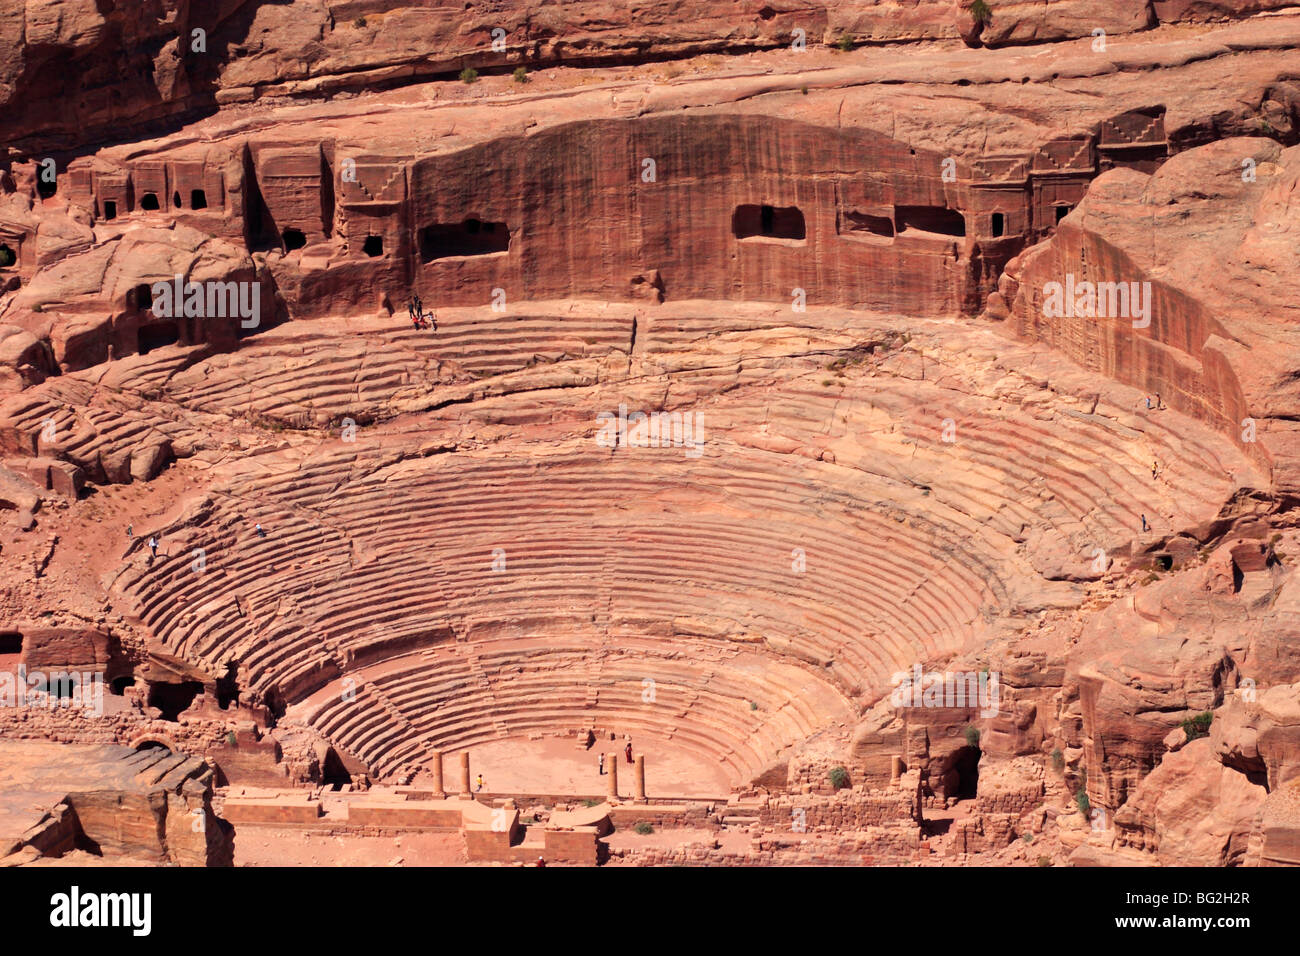 An aerial view of the Roman-era amphitheater carved into the pink sandstone at Petra, Jordan. Stock Photo